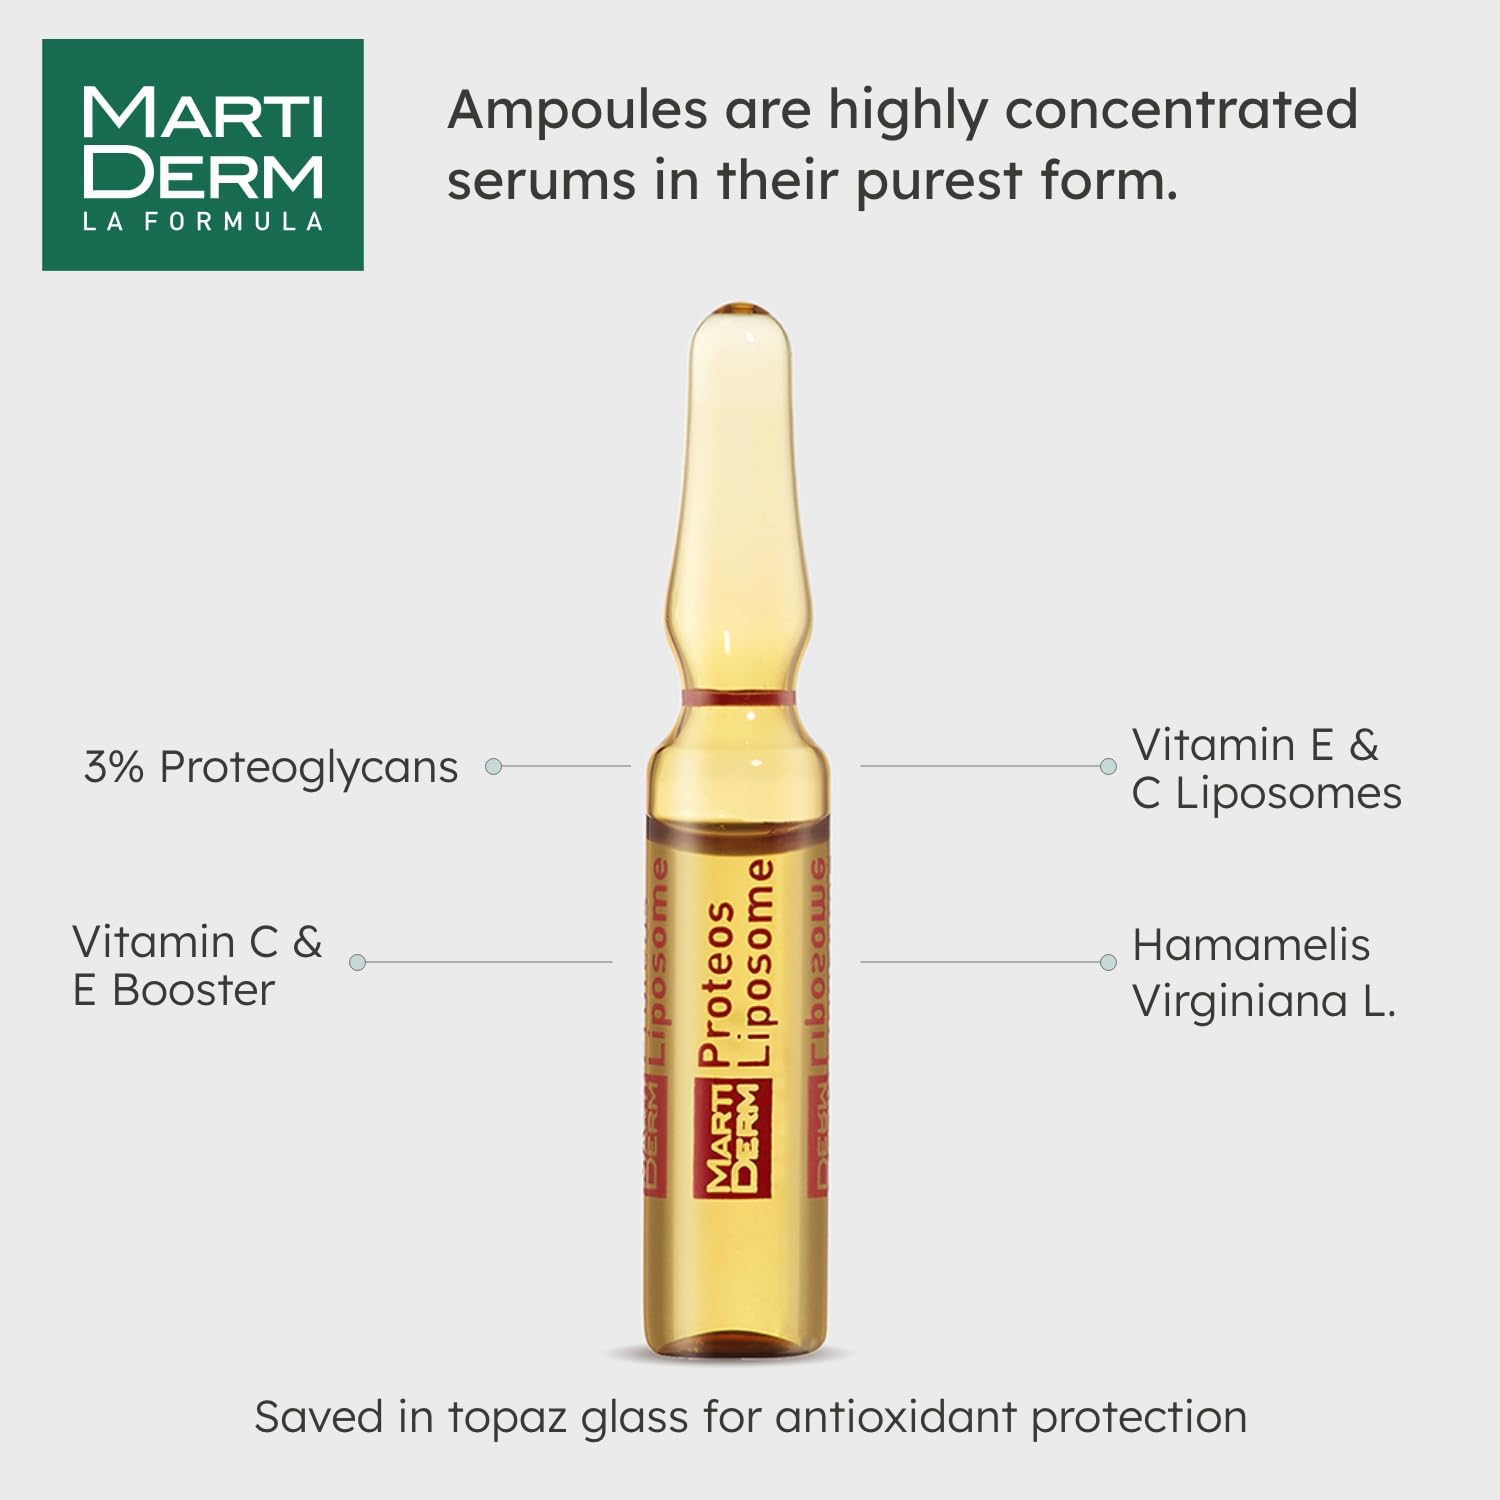 MartiDerm Proteos Liposome Ampoule for Women and Men with Proteoglycans, Vitamin E and C, for Oily Skin Deep Moisturizer and Firming, 10 Ampoules.